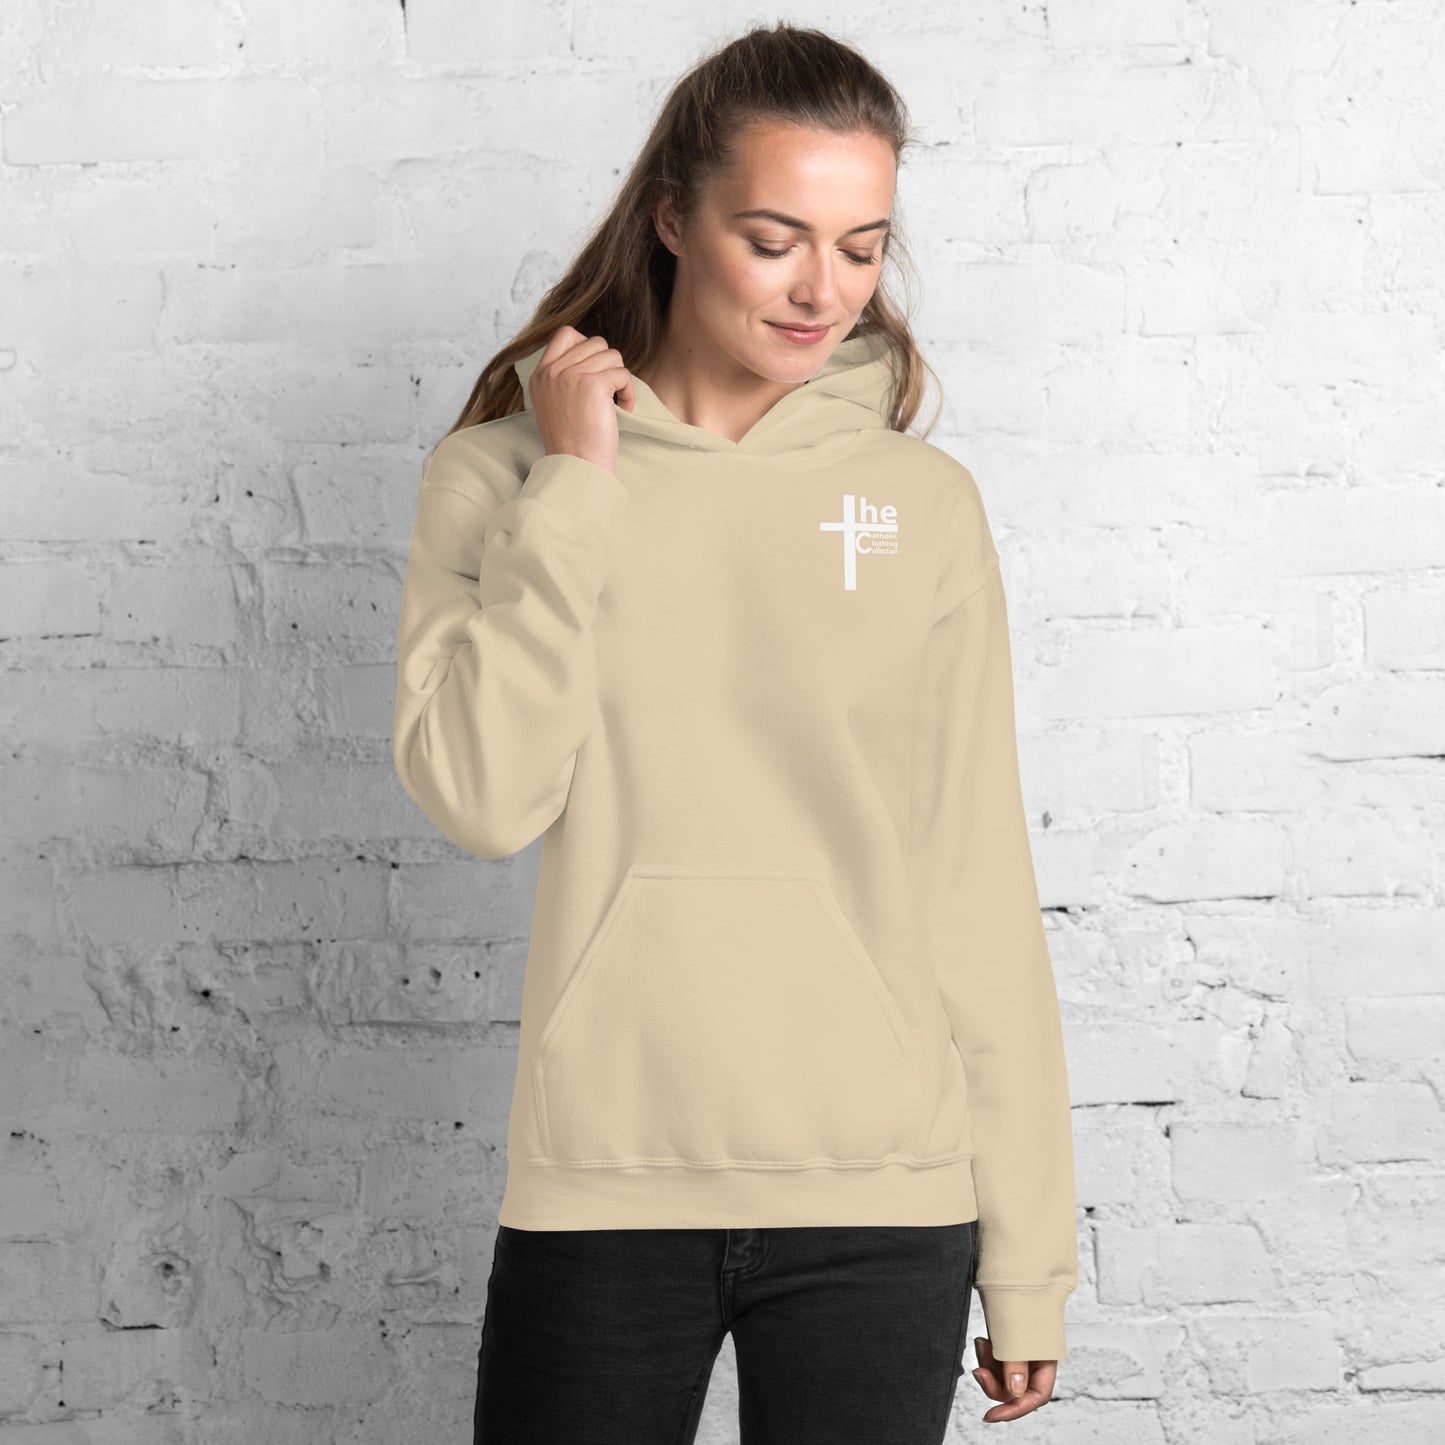 Our Lady of Fatima Women's Hoodie